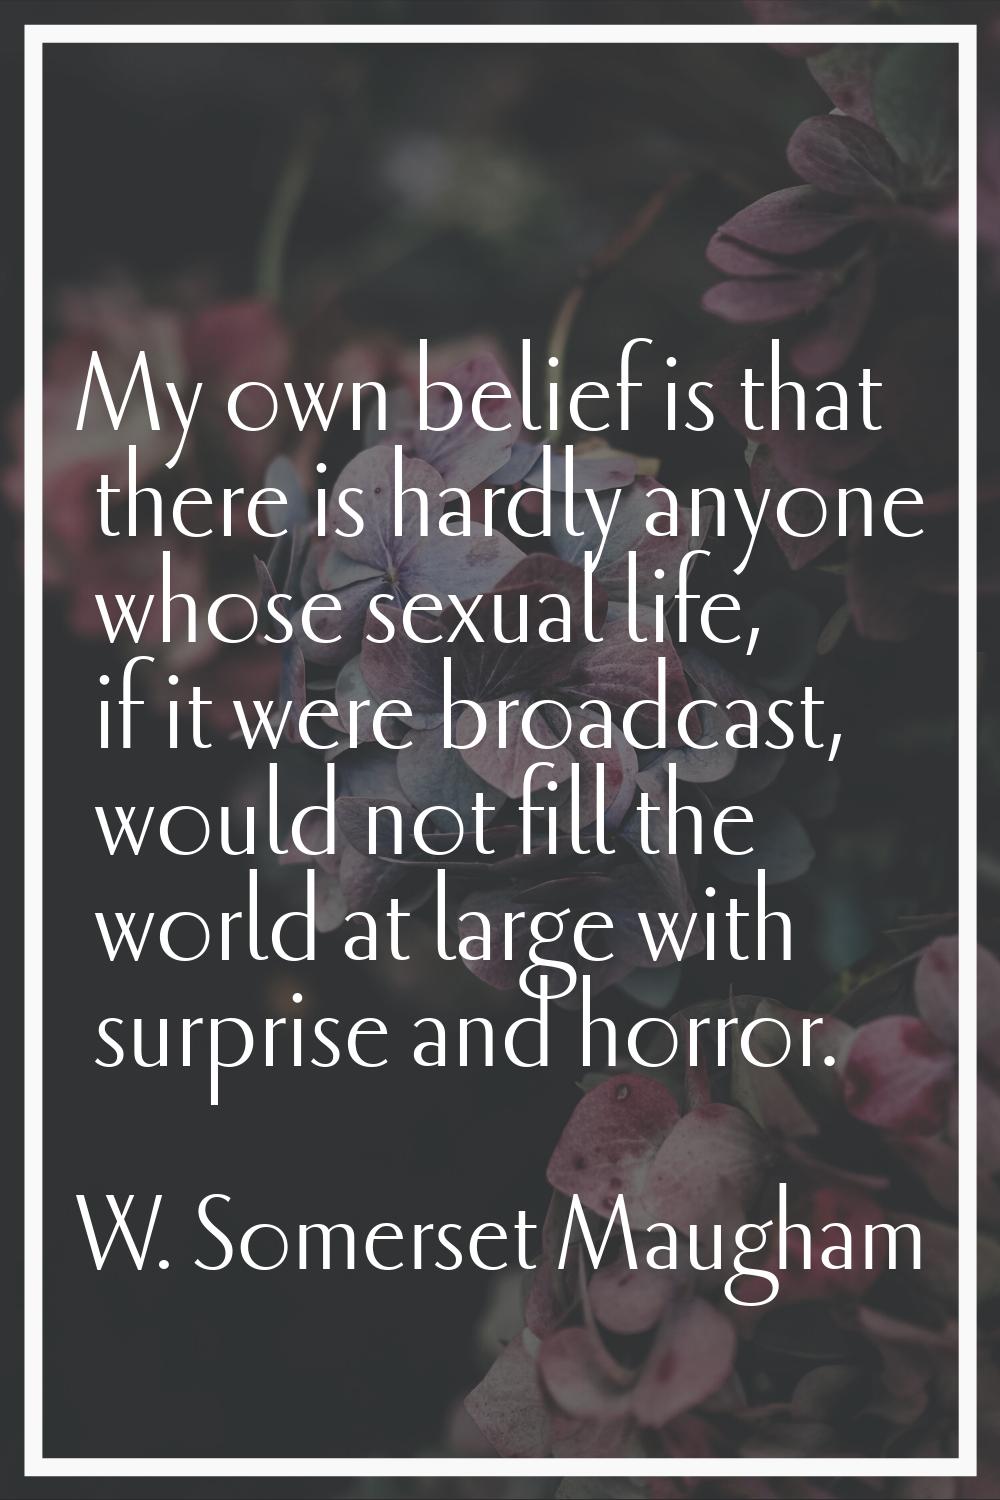 My own belief is that there is hardly anyone whose sexual life, if it were broadcast, would not fil